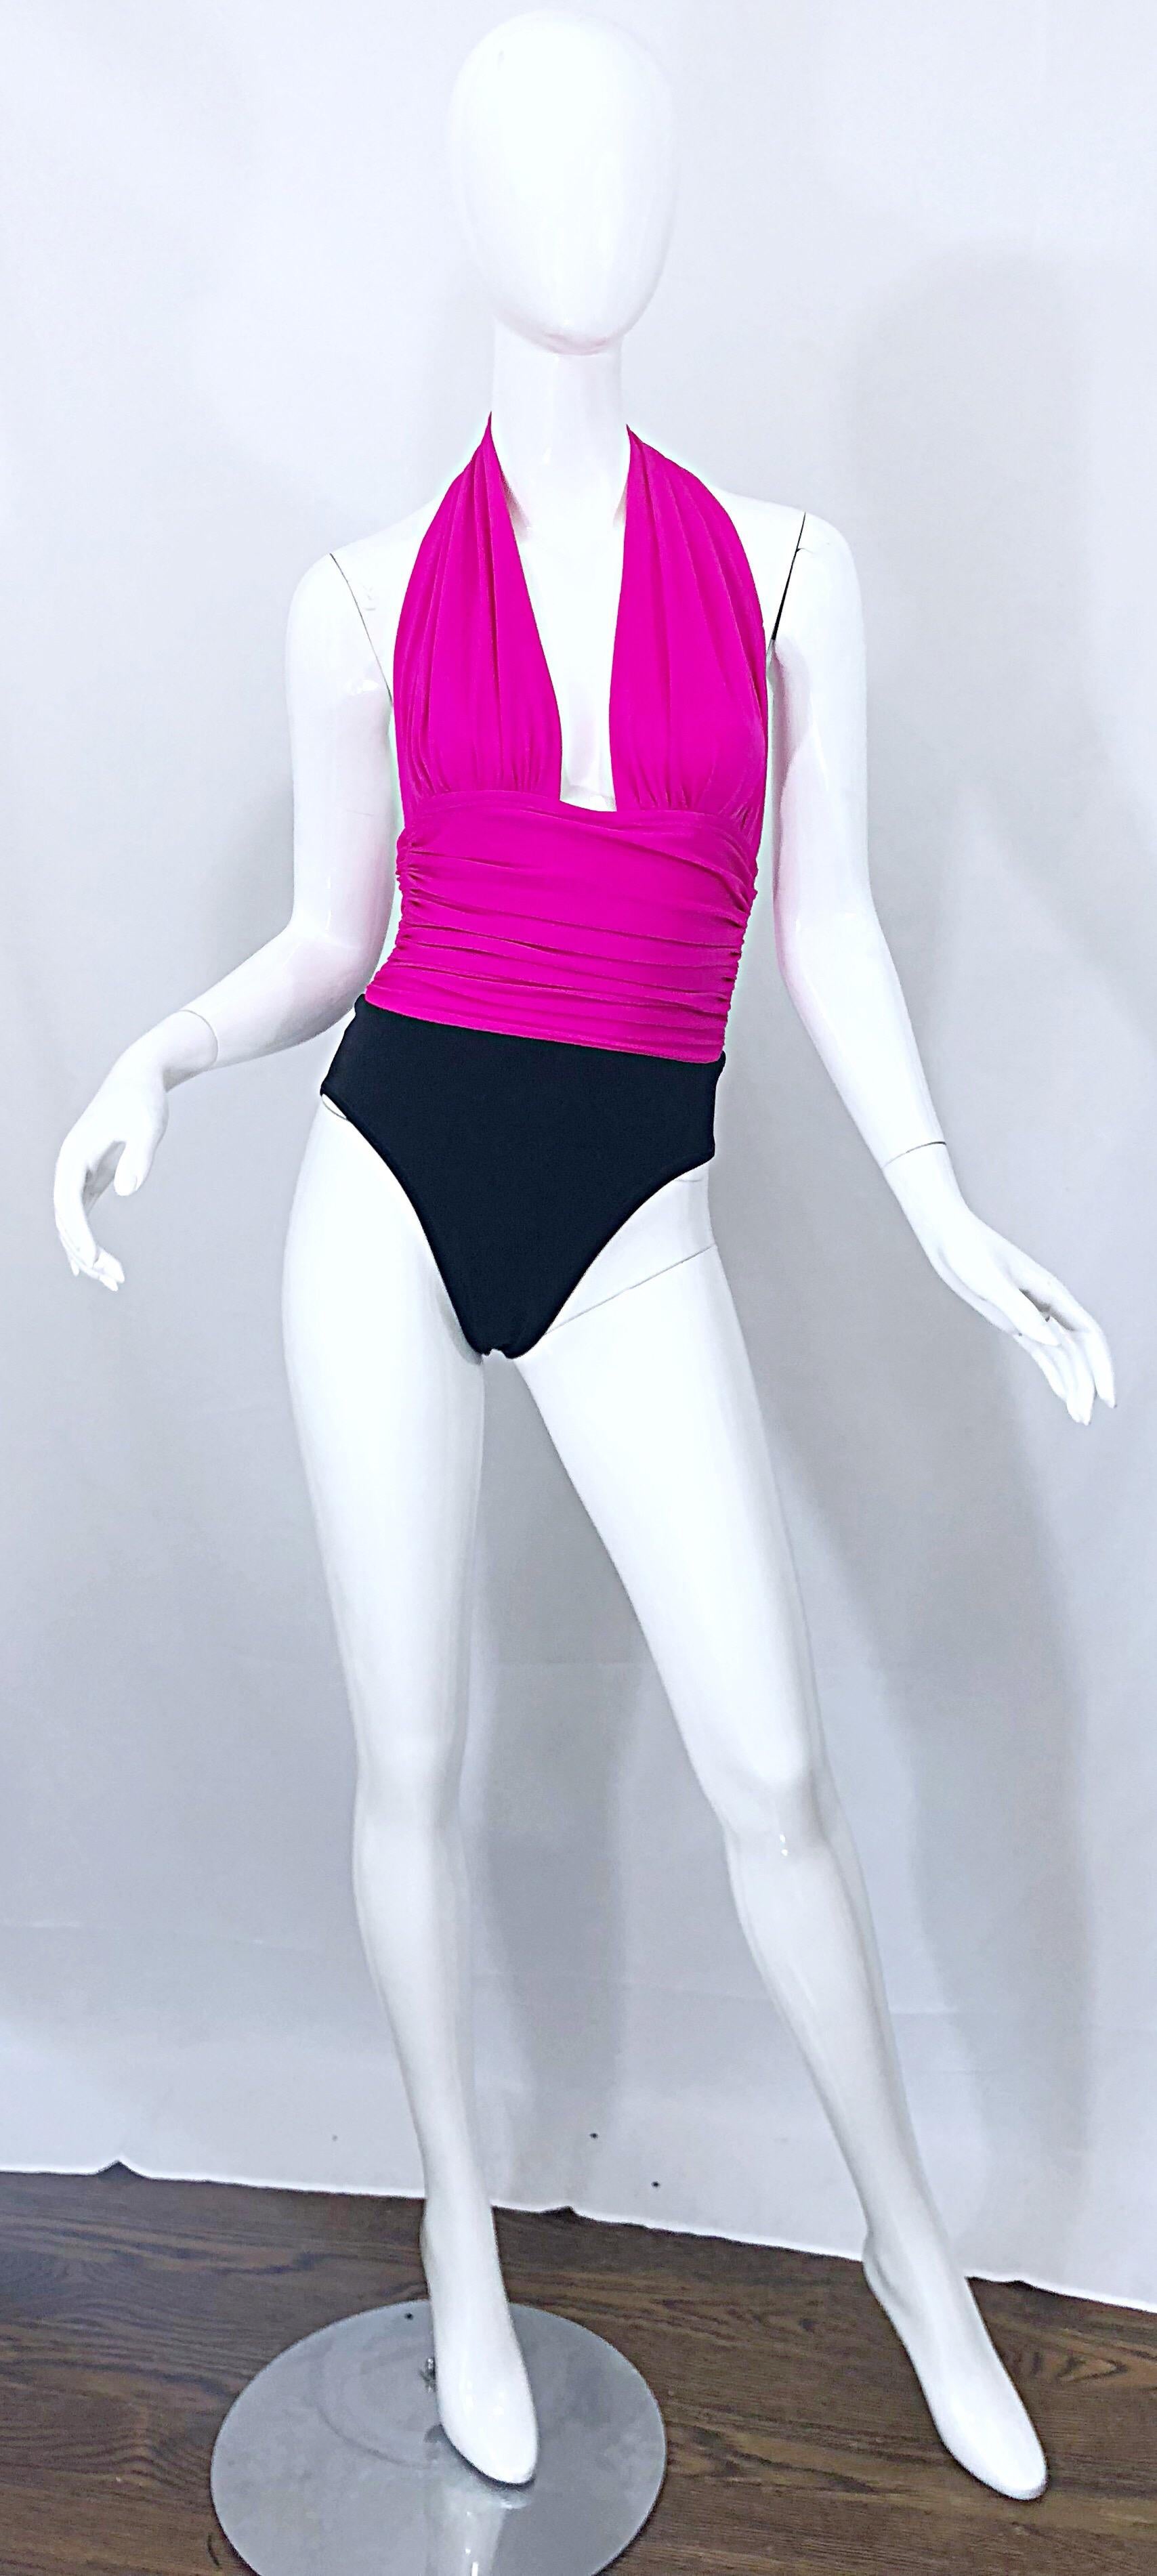 Sexy vintage YVES SAINT LAURENT hot pink and black plunging halter one piece swimsuit or bodysuit! Features a flattering ruched bodice with a plunging neckline. Plastic clasp at top back neck. Very sexy and flattering. Perfect for the beach, pool,